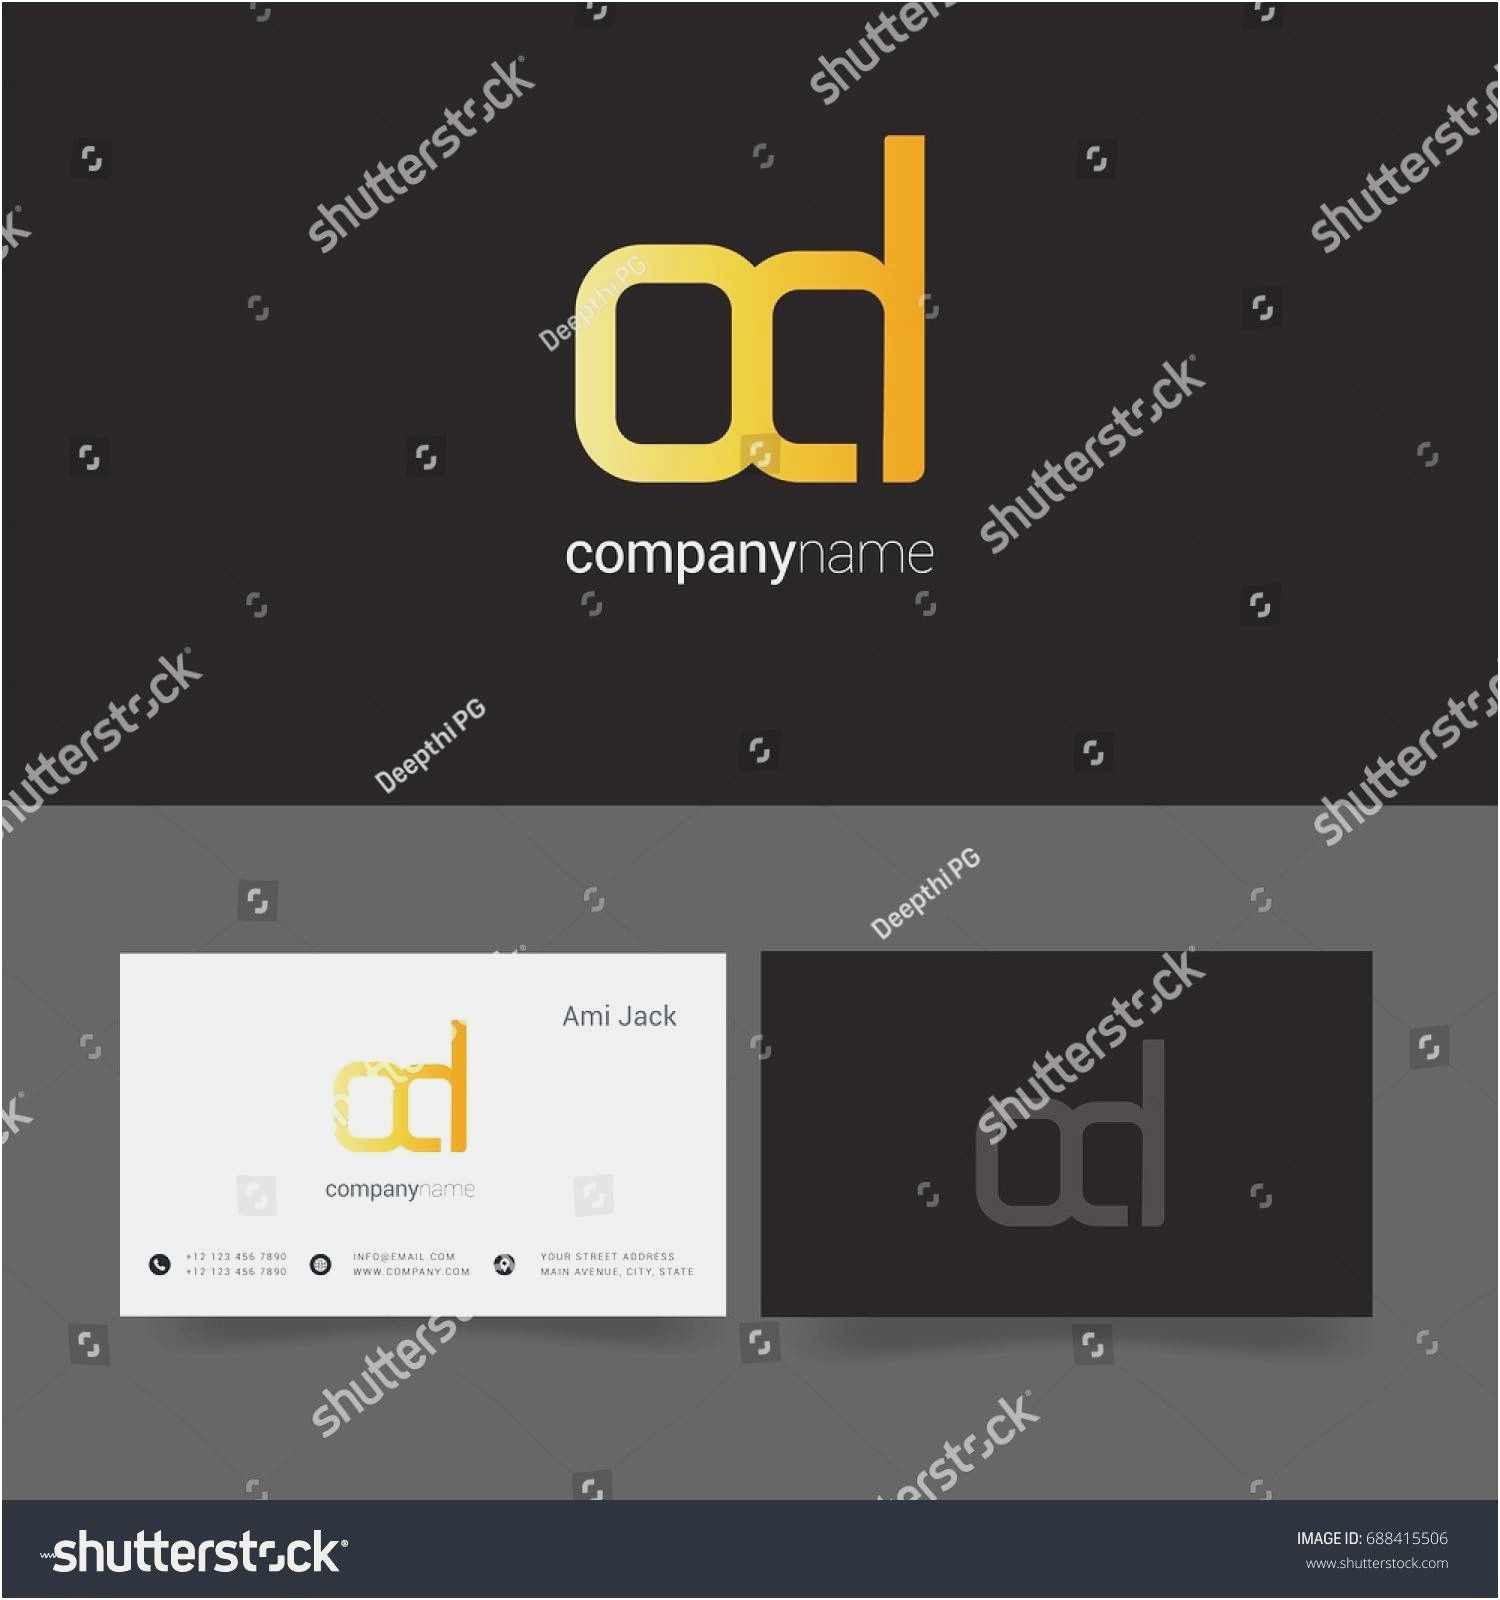 free awesome gallery free business card template in 2019 business cards free